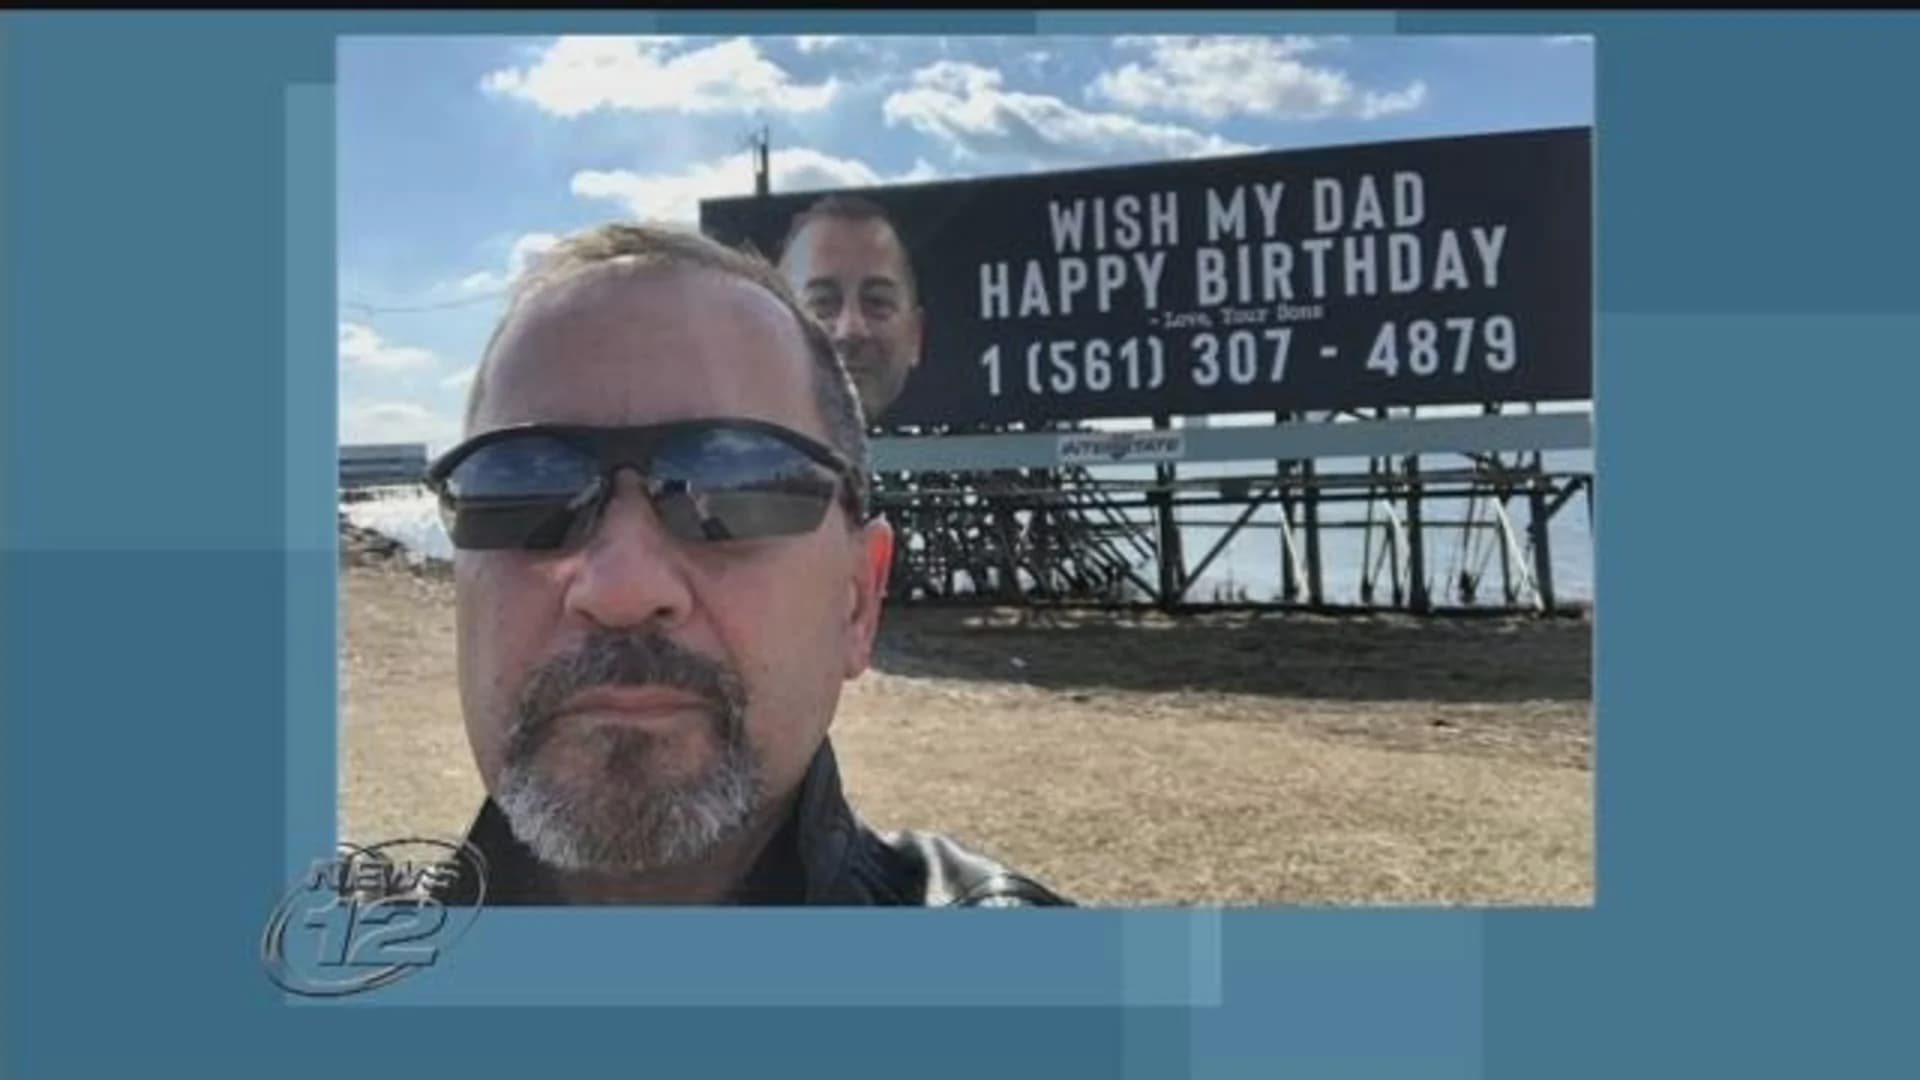 Sons post father’s phone number on billboard to get him birthday wishes